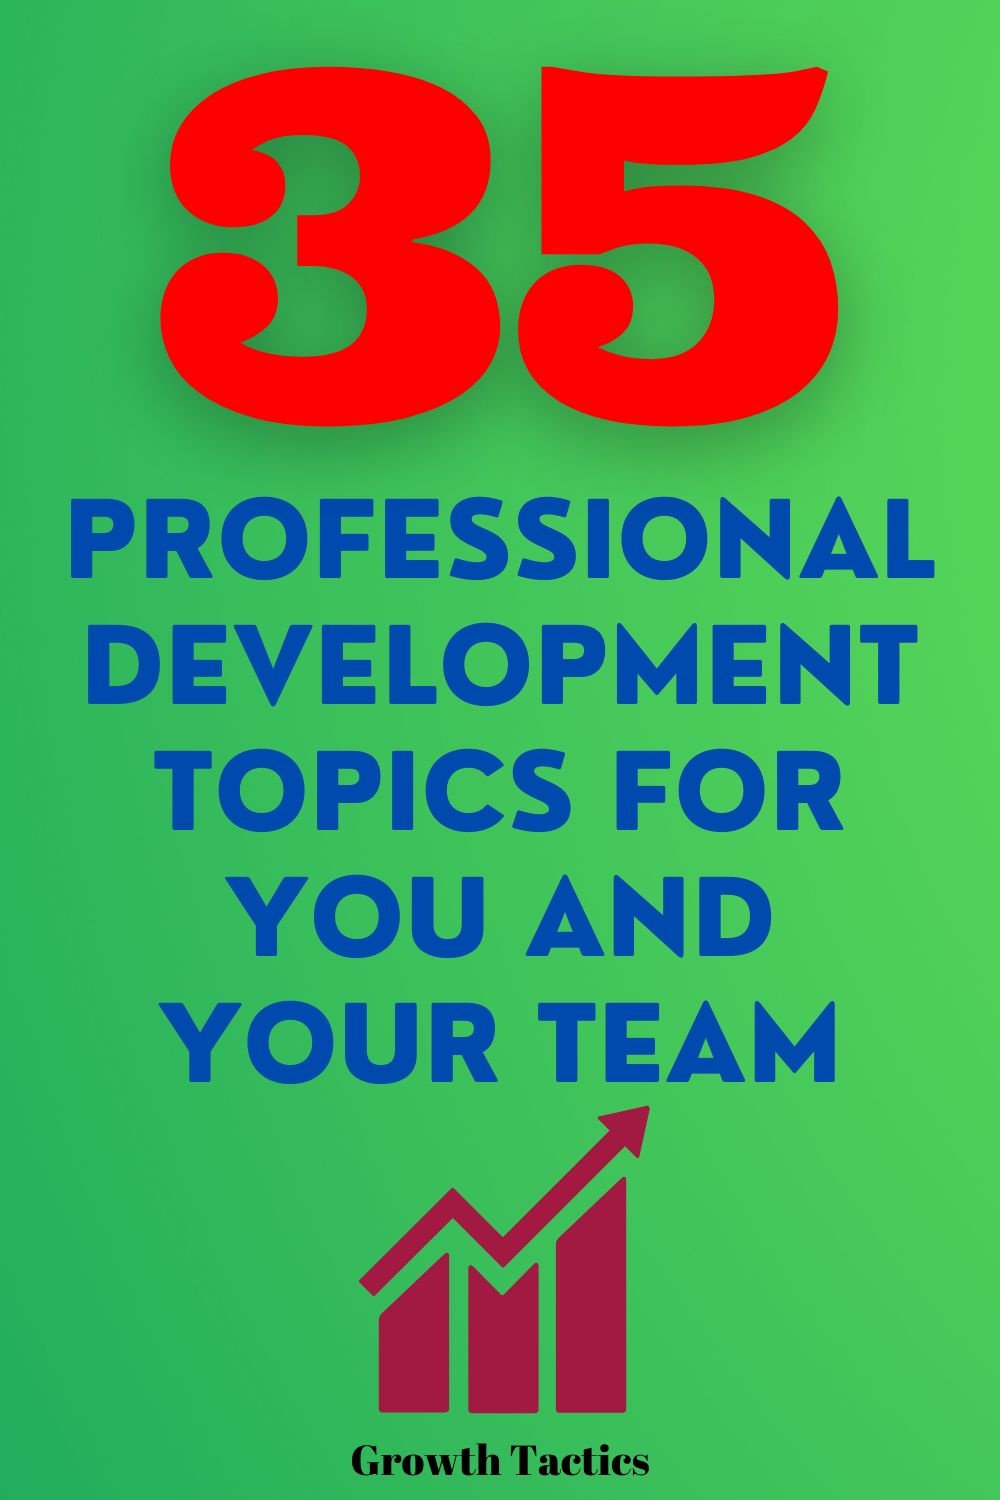 35 Professional Development Topics for You and Your Team